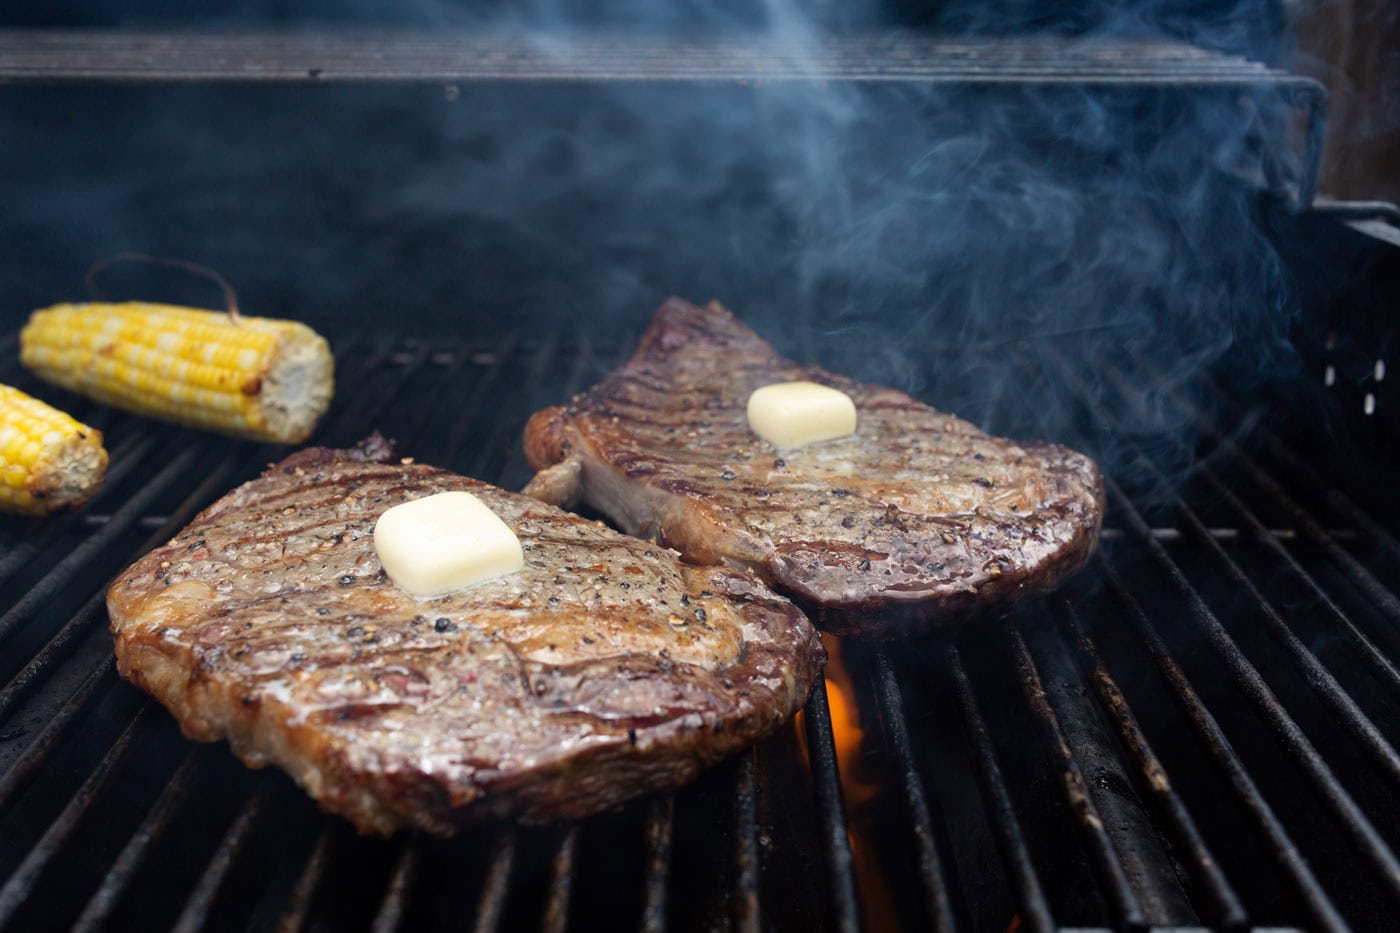 pats of butter on grilled new york strips steaks